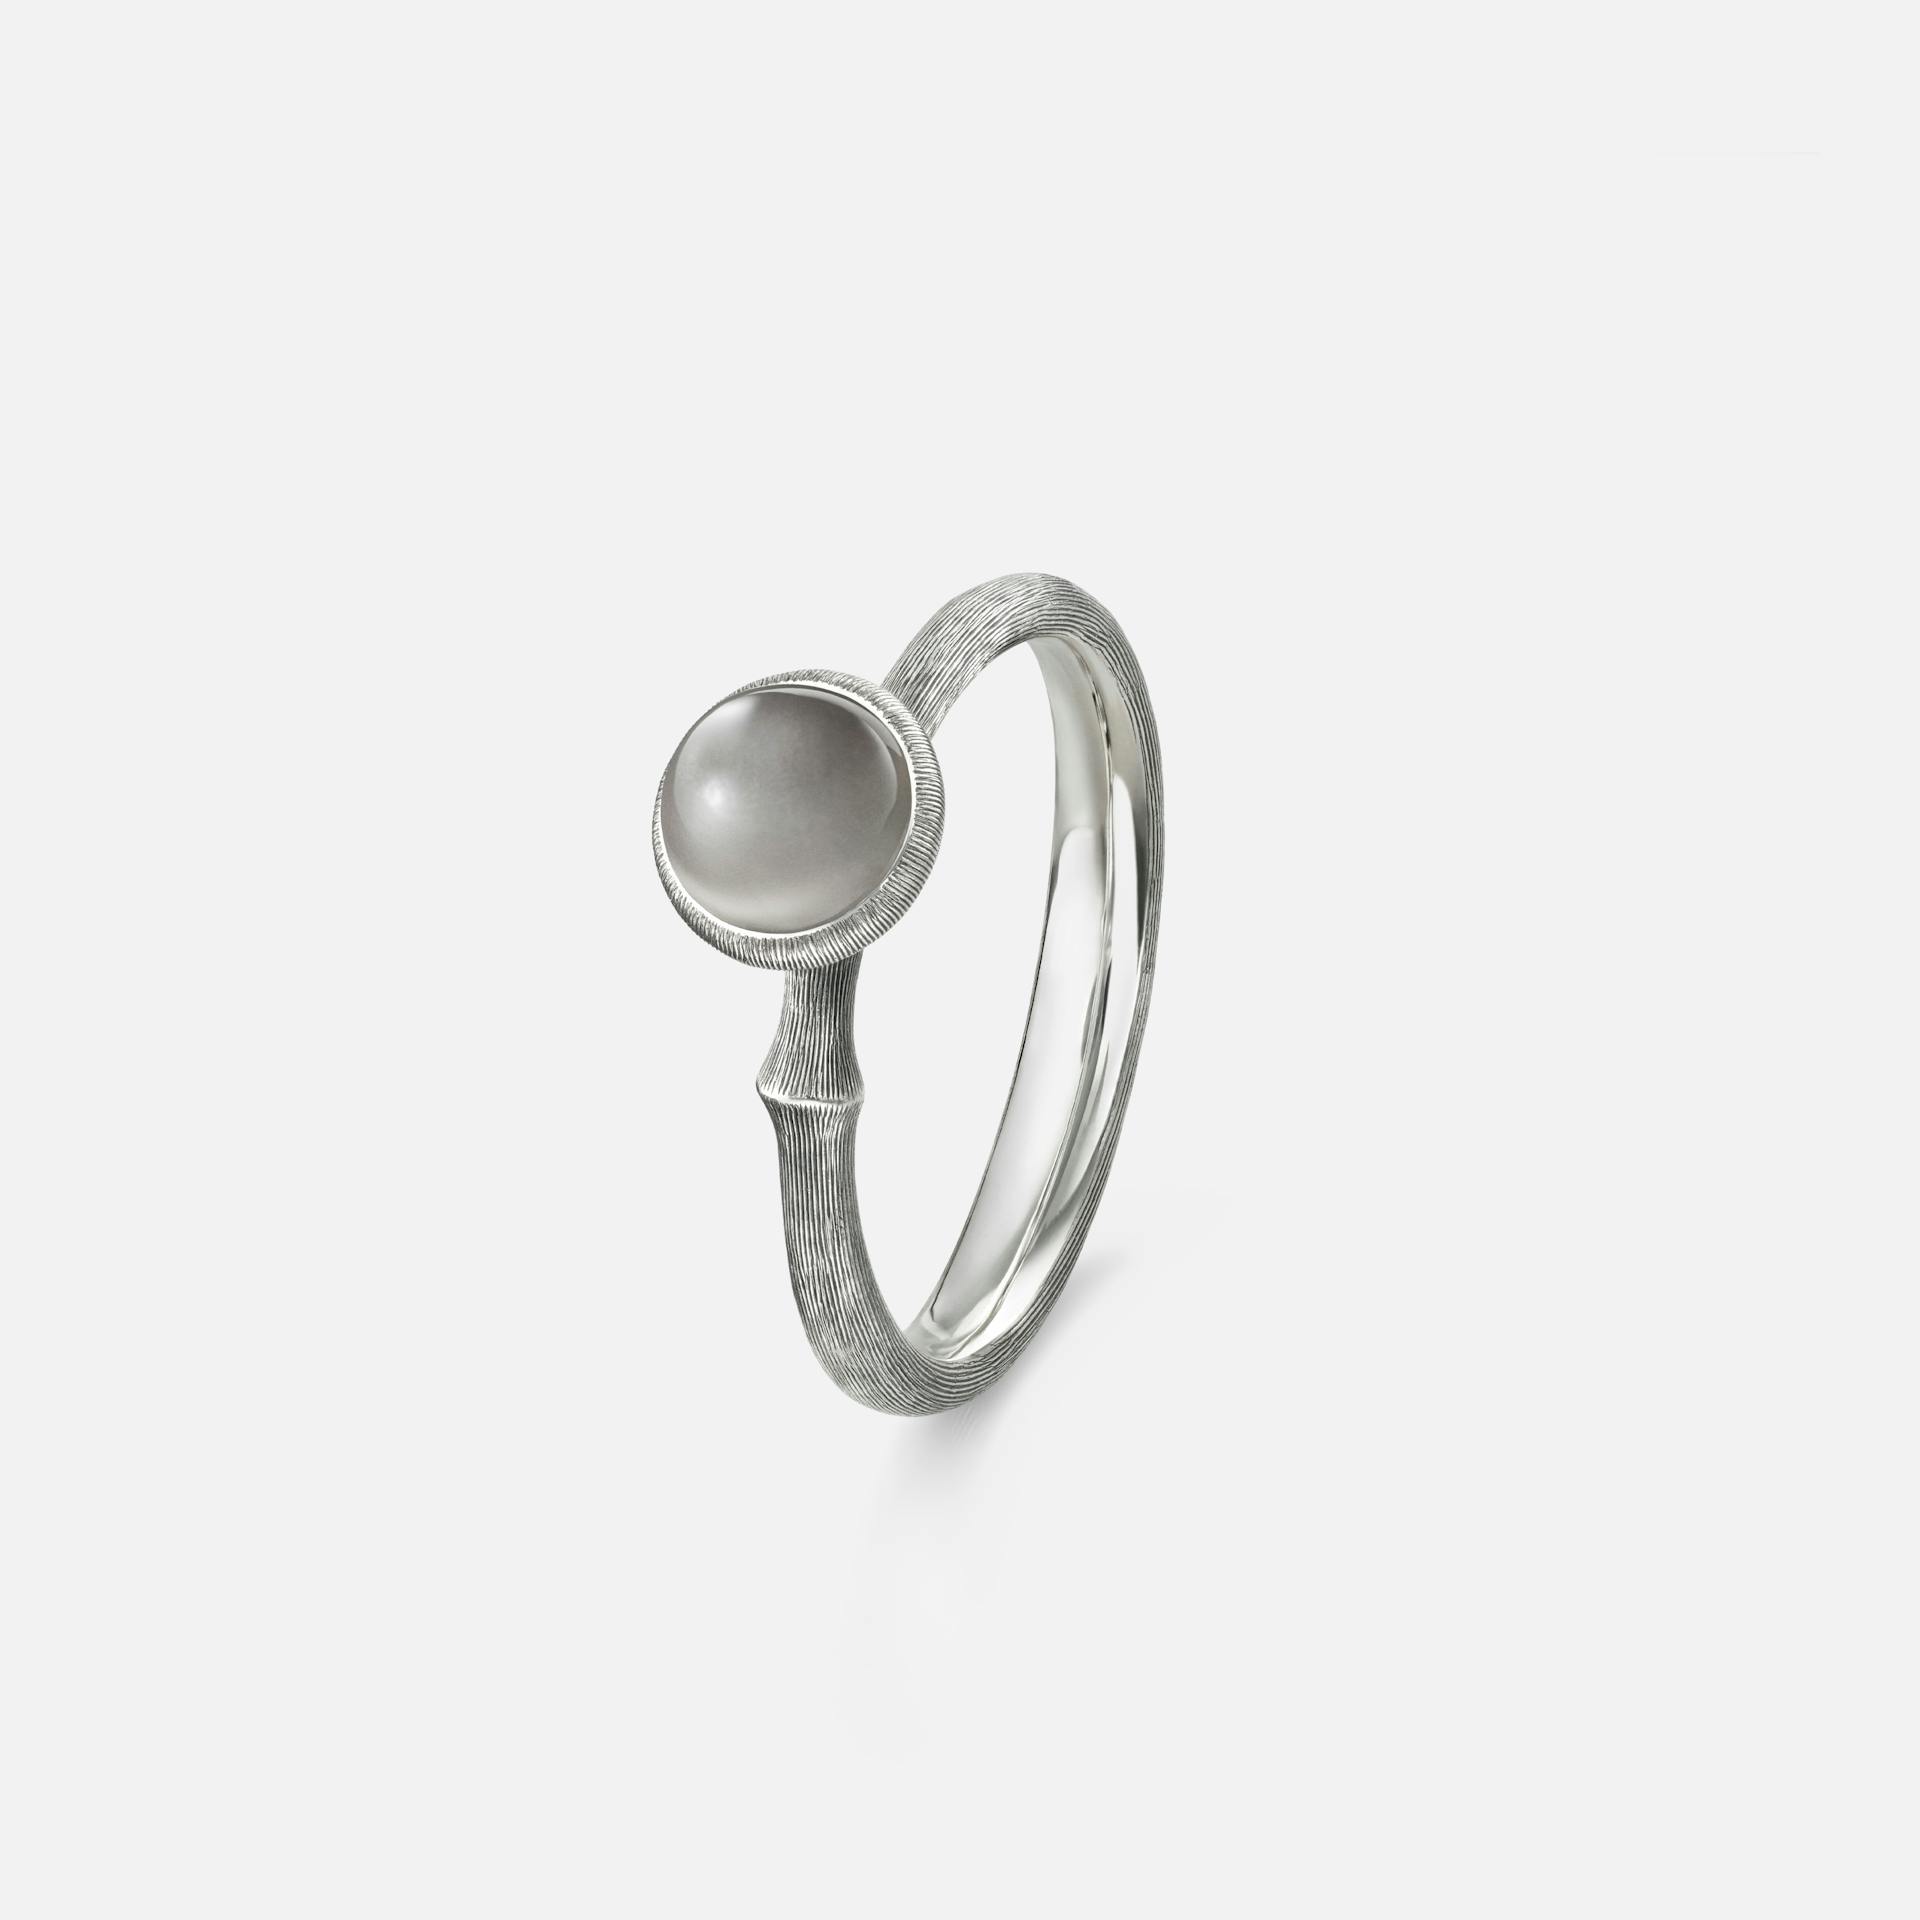 Lotus Ring size 0 in Oxidized Sterling Silver with Grey Moonstone  |  Ole Lynggaard Copenhagen